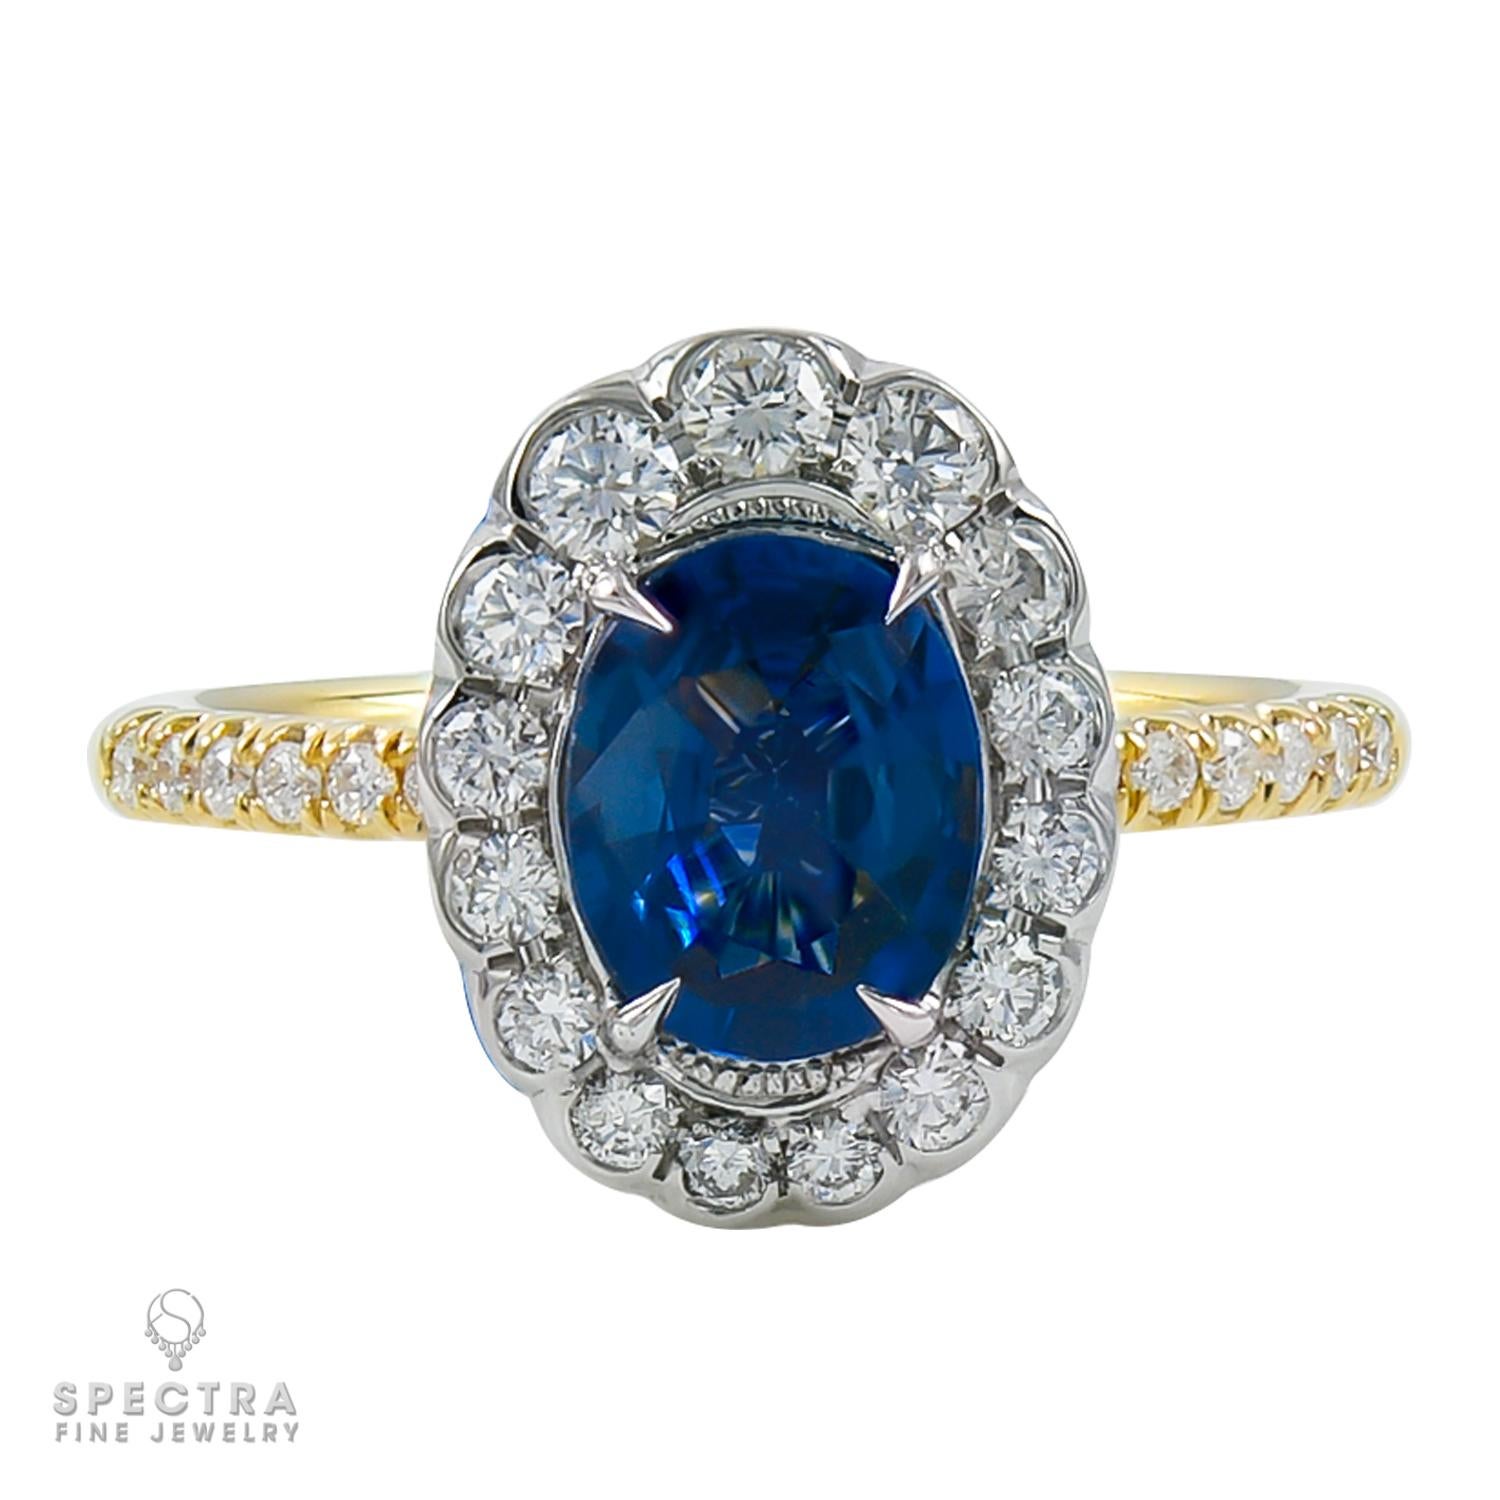 A cocktail ring featuring a 1.42 carat oval blue sapphire, set in a halo of pave diamonds.
Total weight of diamonds is 0.6 carats.
Metal is 18k yellow gold; gross weight 4.15 g.
Size 6.5. Sizable.